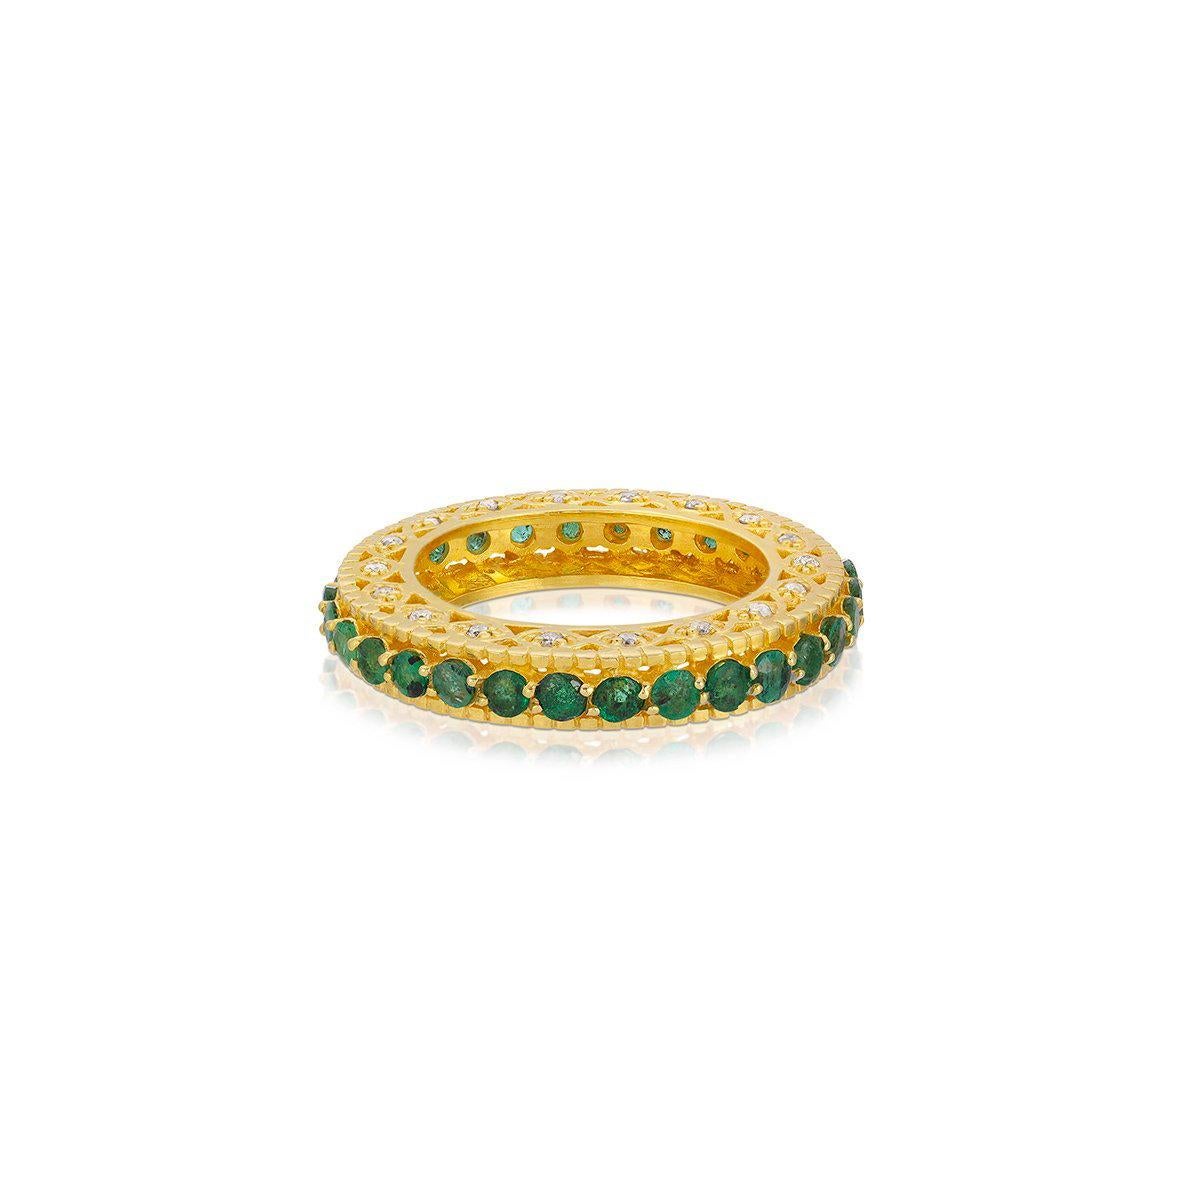 The Mara Emerald Eternity band... fully set with fiery Emeralds featuring an opulent filigree depth studded with Diamonds. 

- Natural Emeralds weight approx 2.56 Carats.
- White Diamonds weight approx .62 Carats.
- Set in 22 Karat Gold overlay